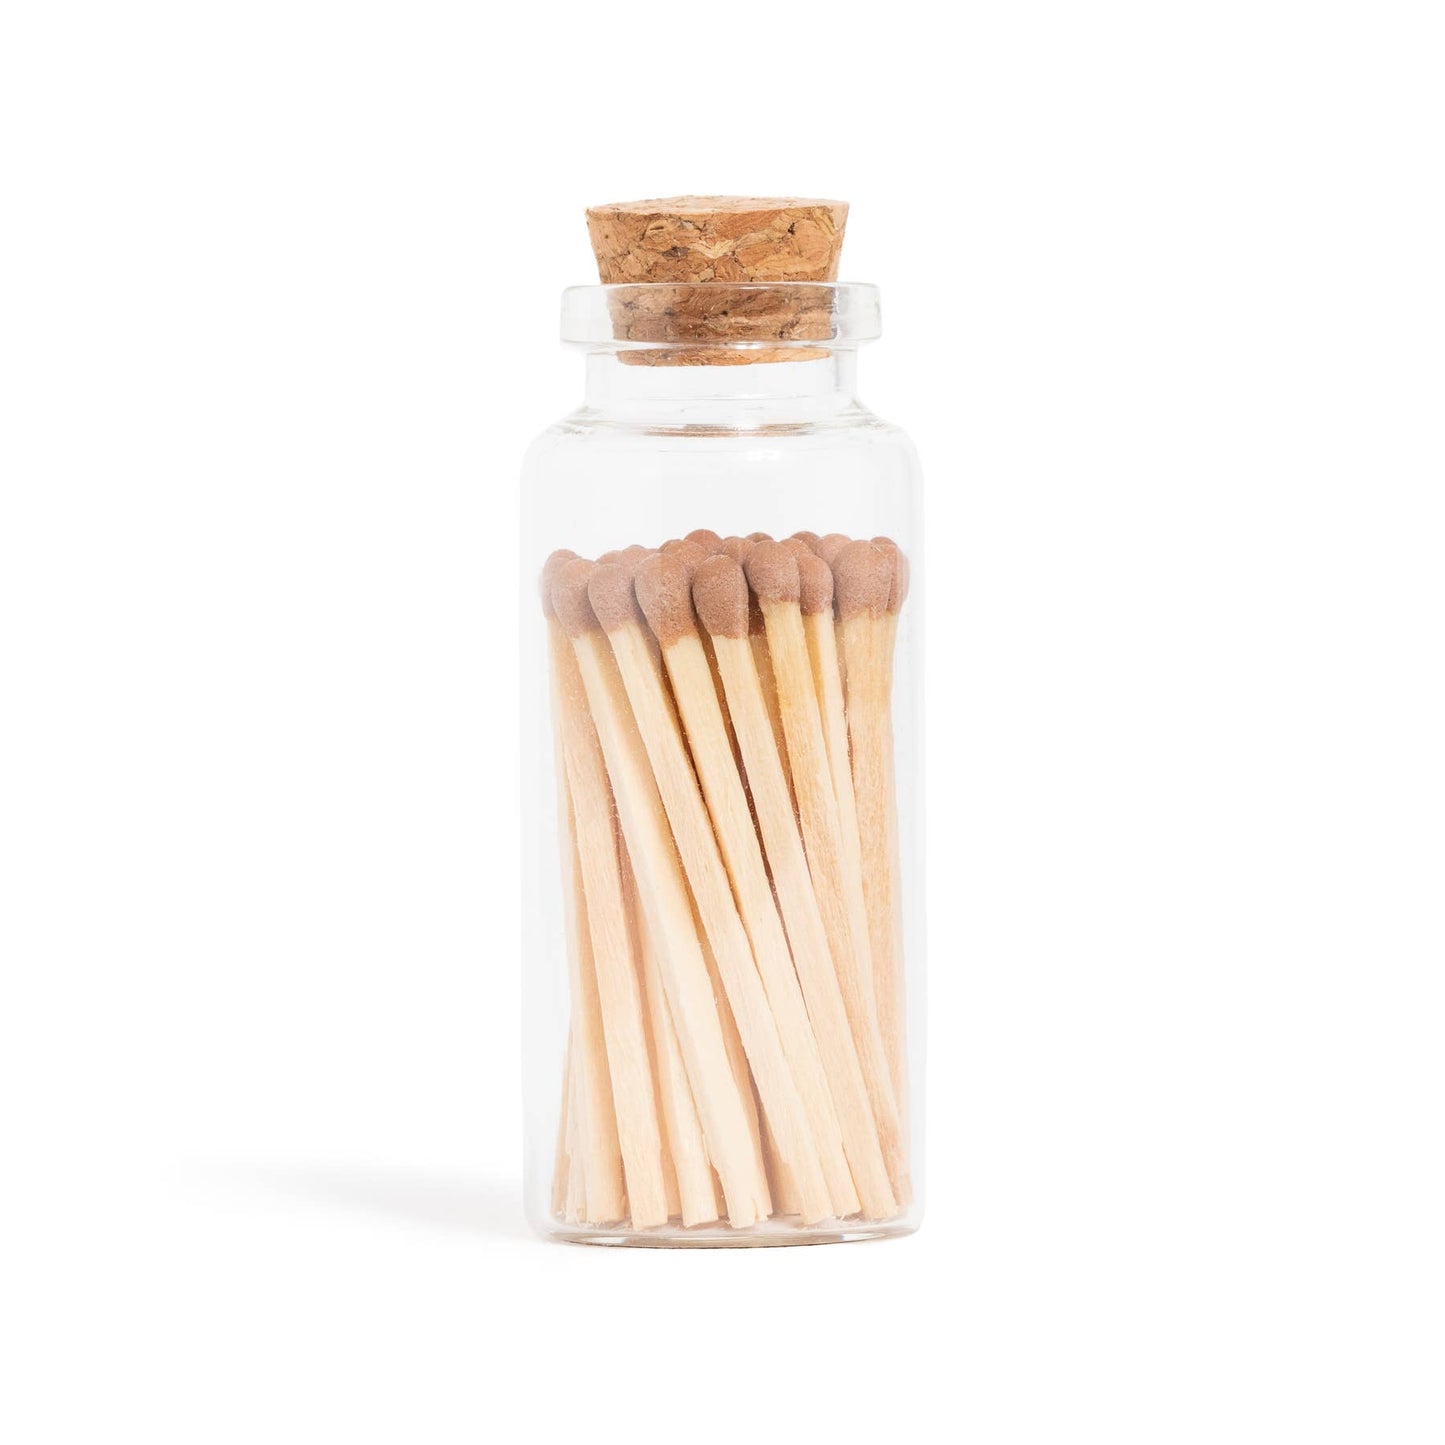 Matches in Corked Vial